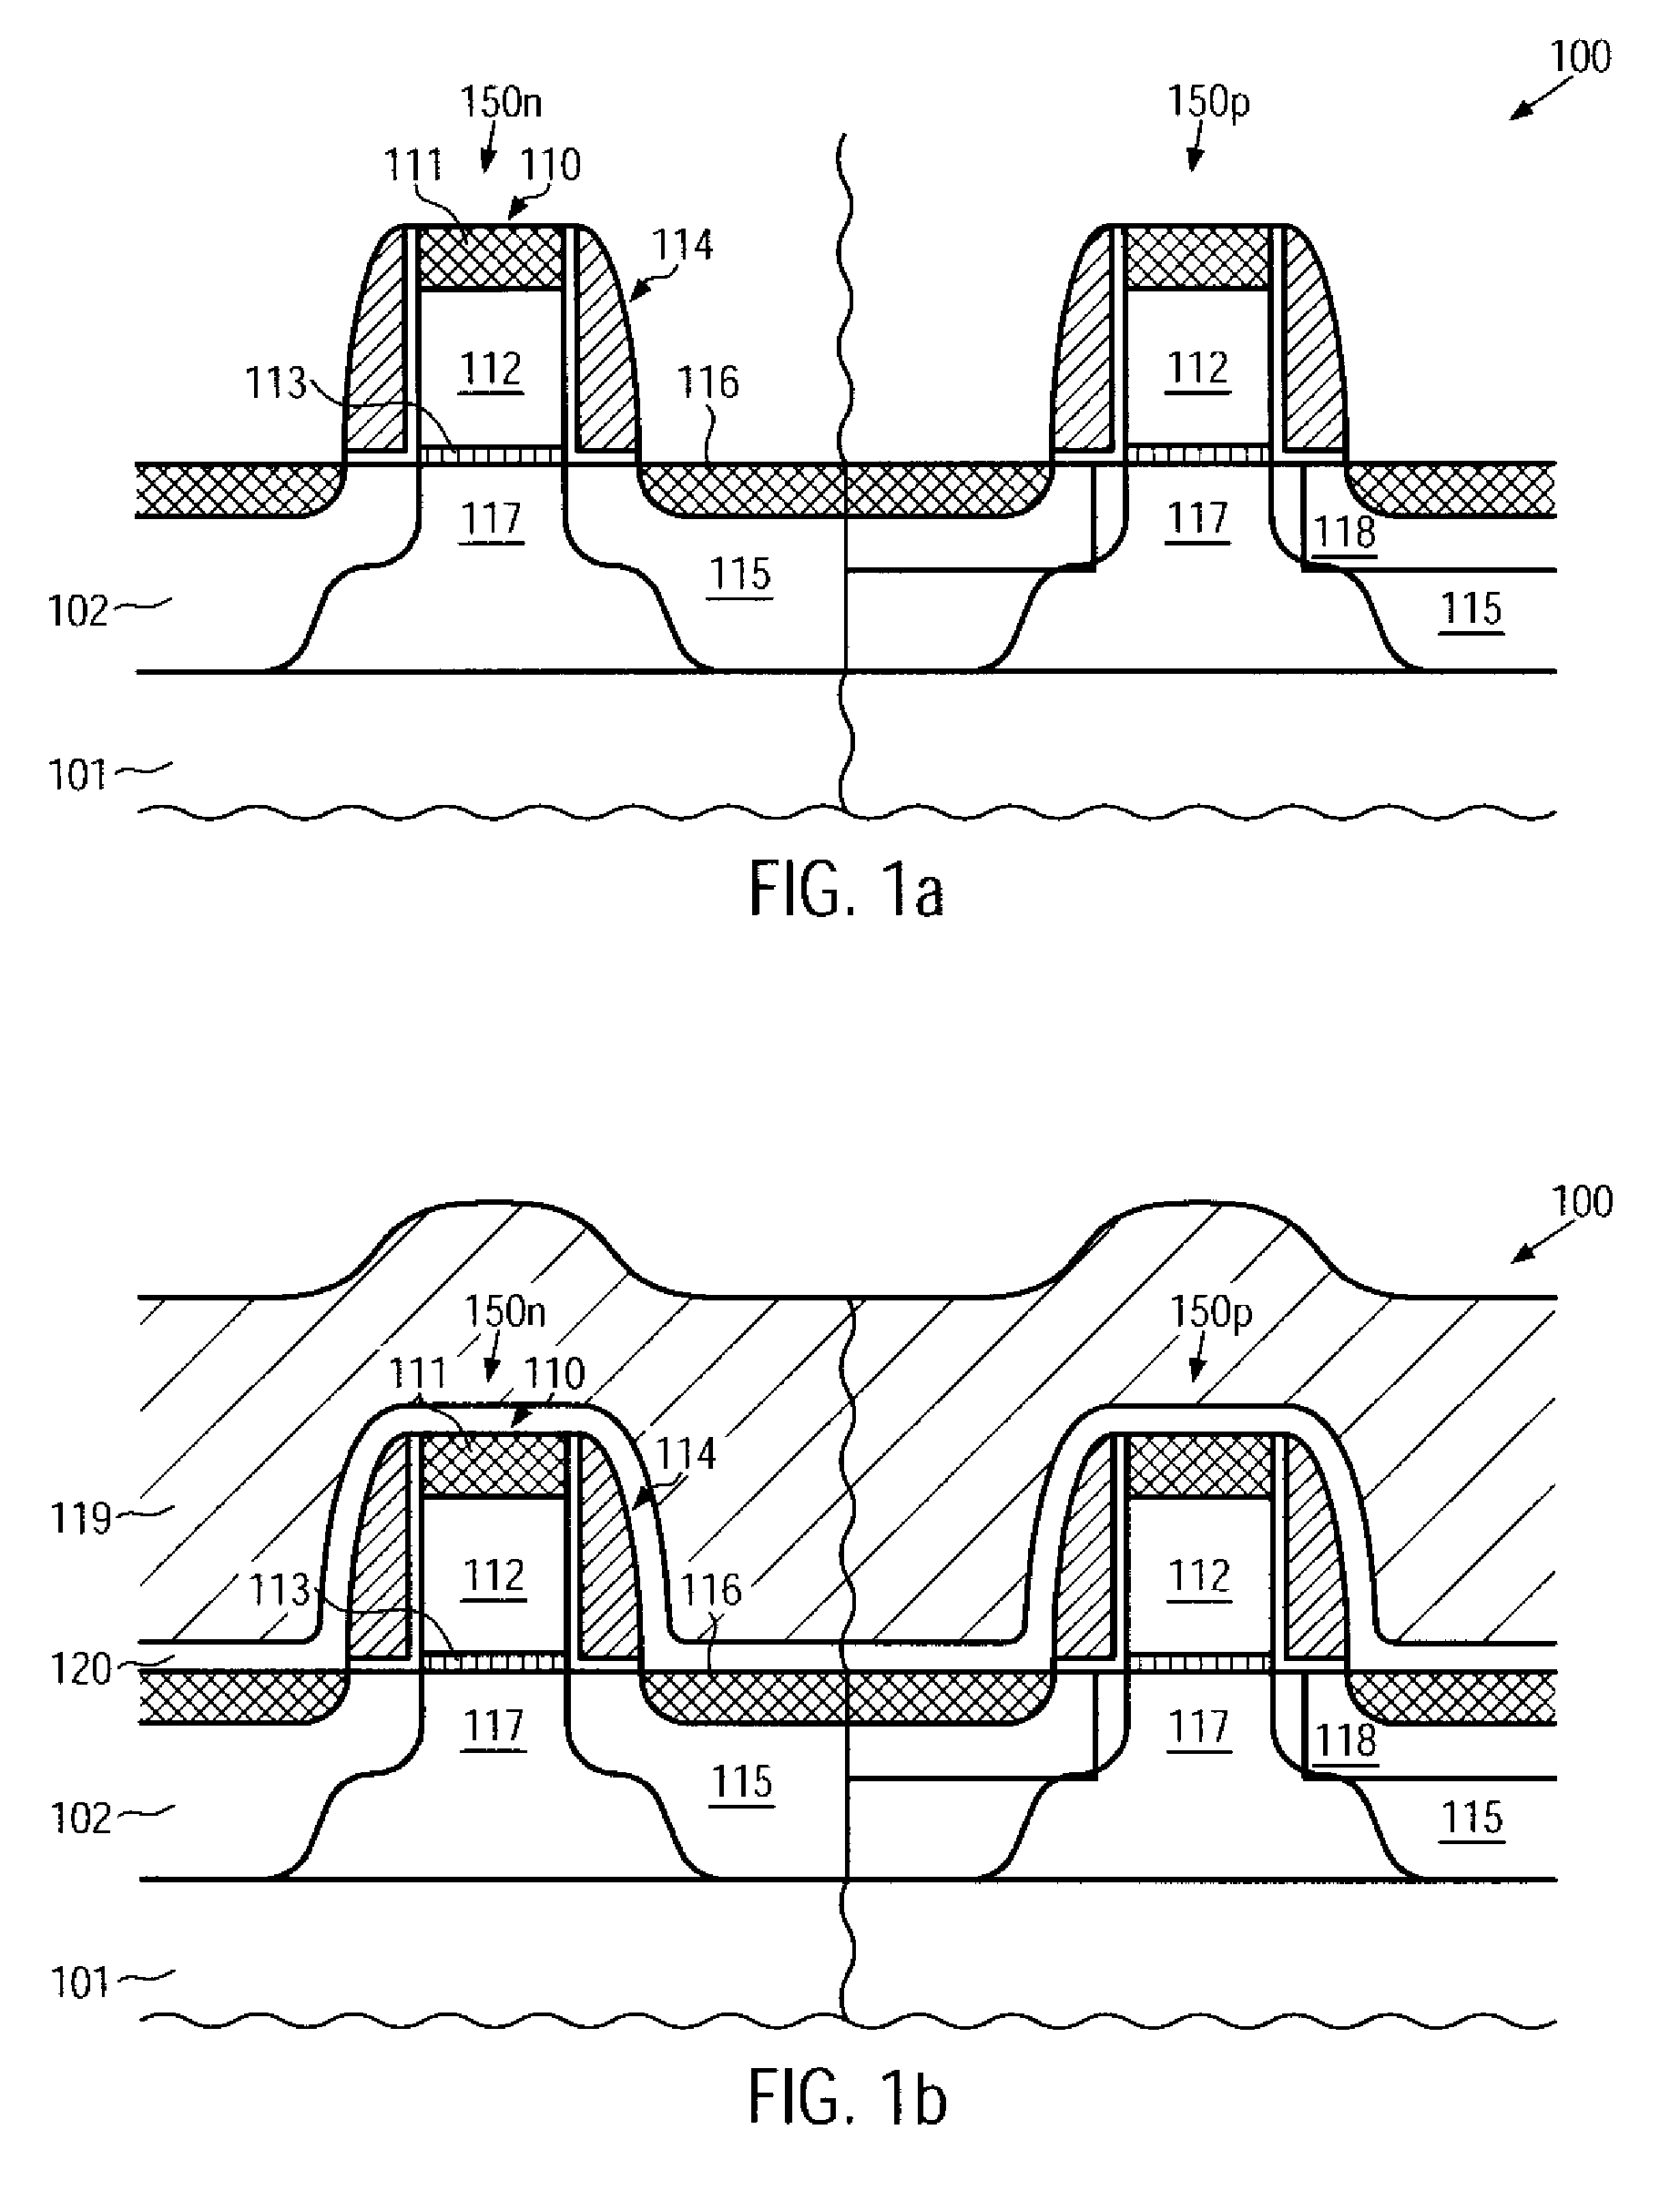 CMOS device having gate insulation layers of different type and thickness and a method of forming the same